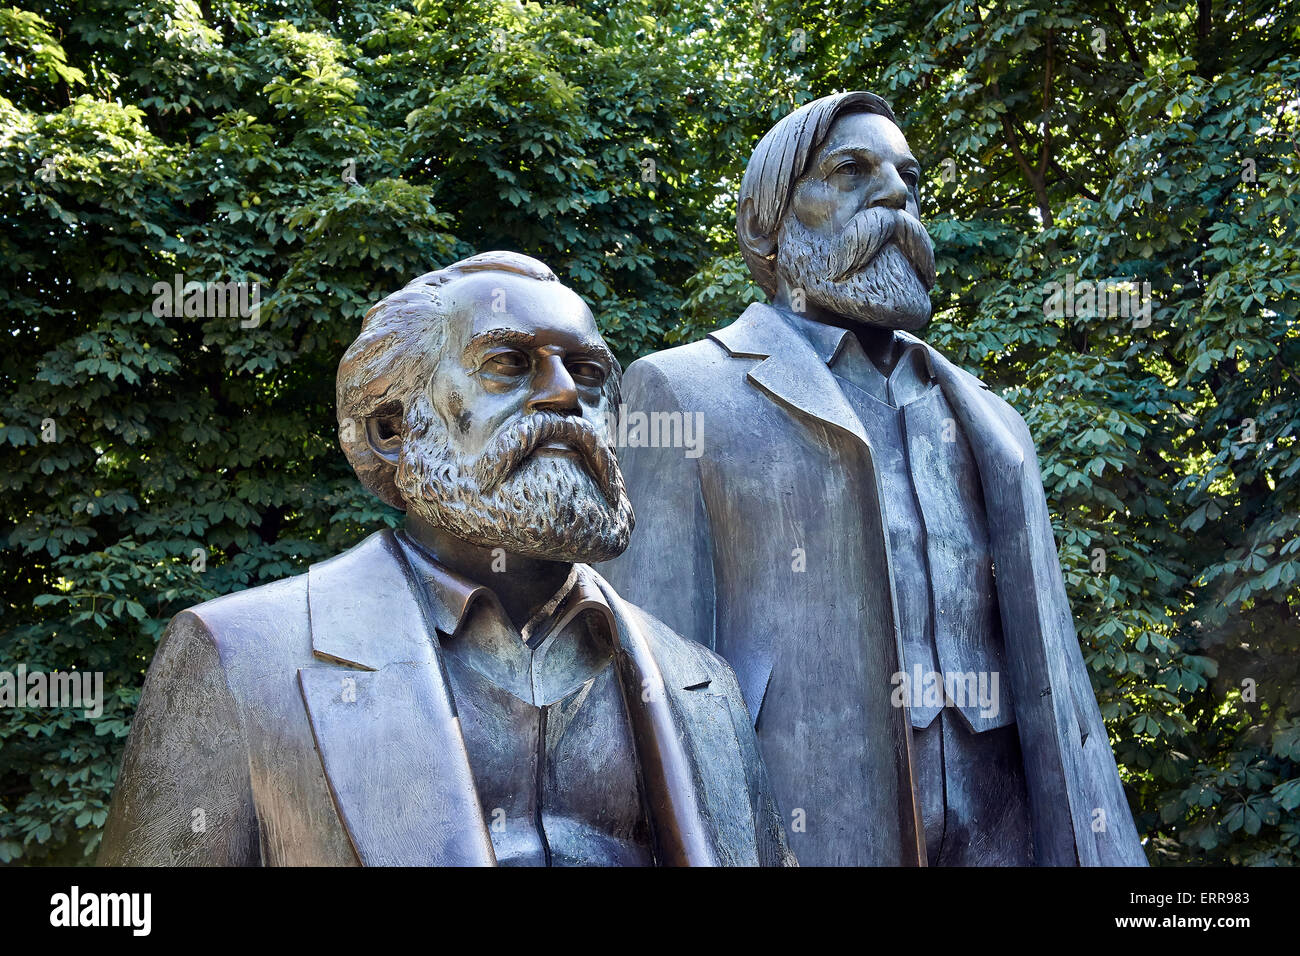 Germany, Berlin, Mitte district, Karl Marx and Engel statues. Stock Photo